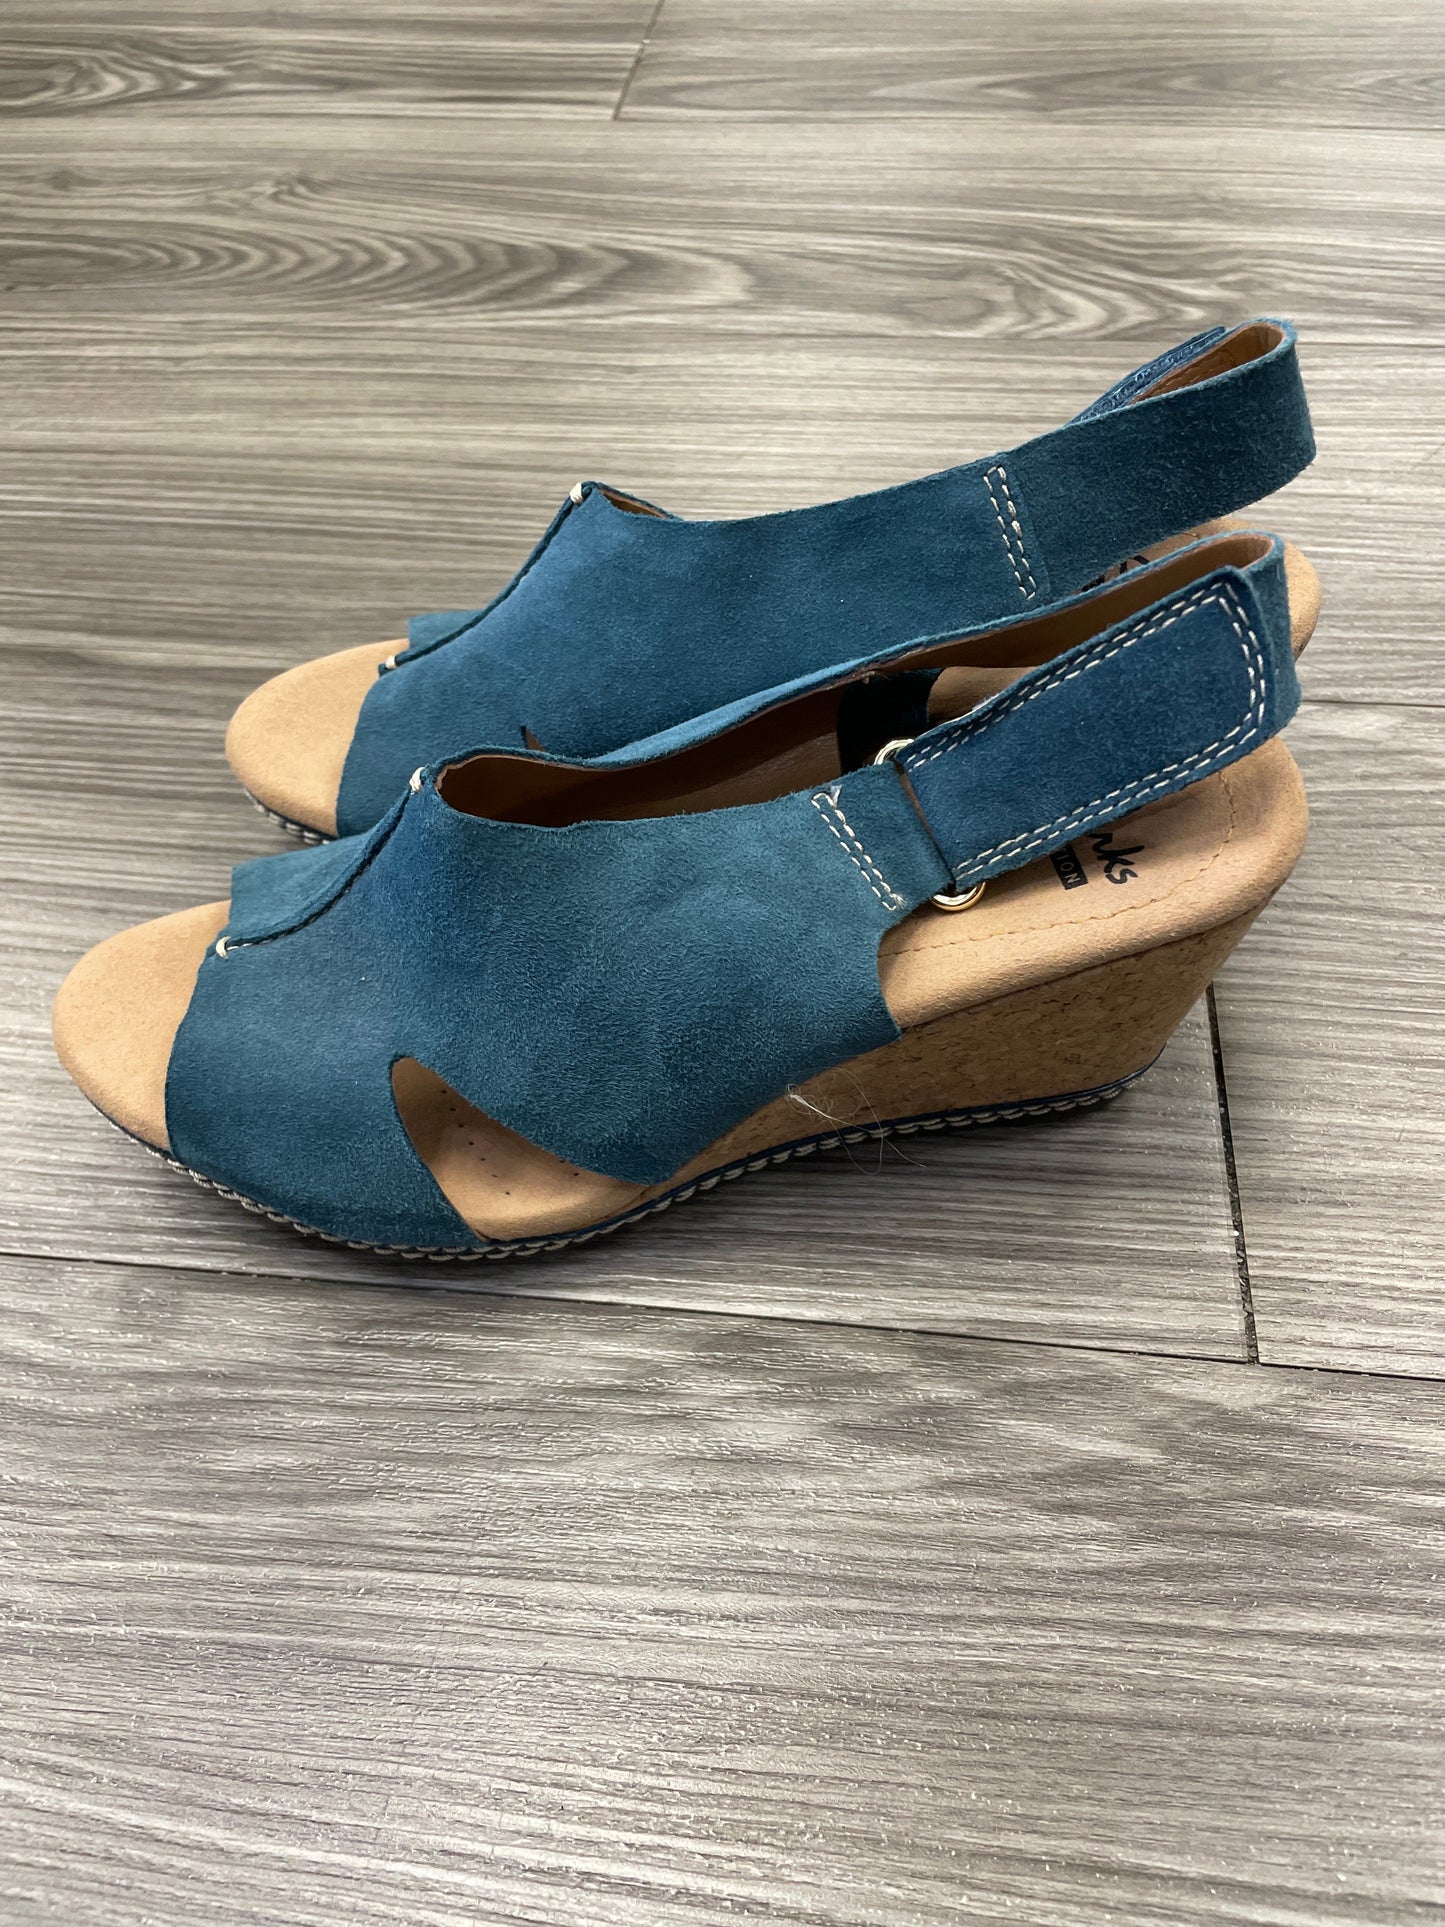 Shoes Heels Wedge By Clarks  Size: 6